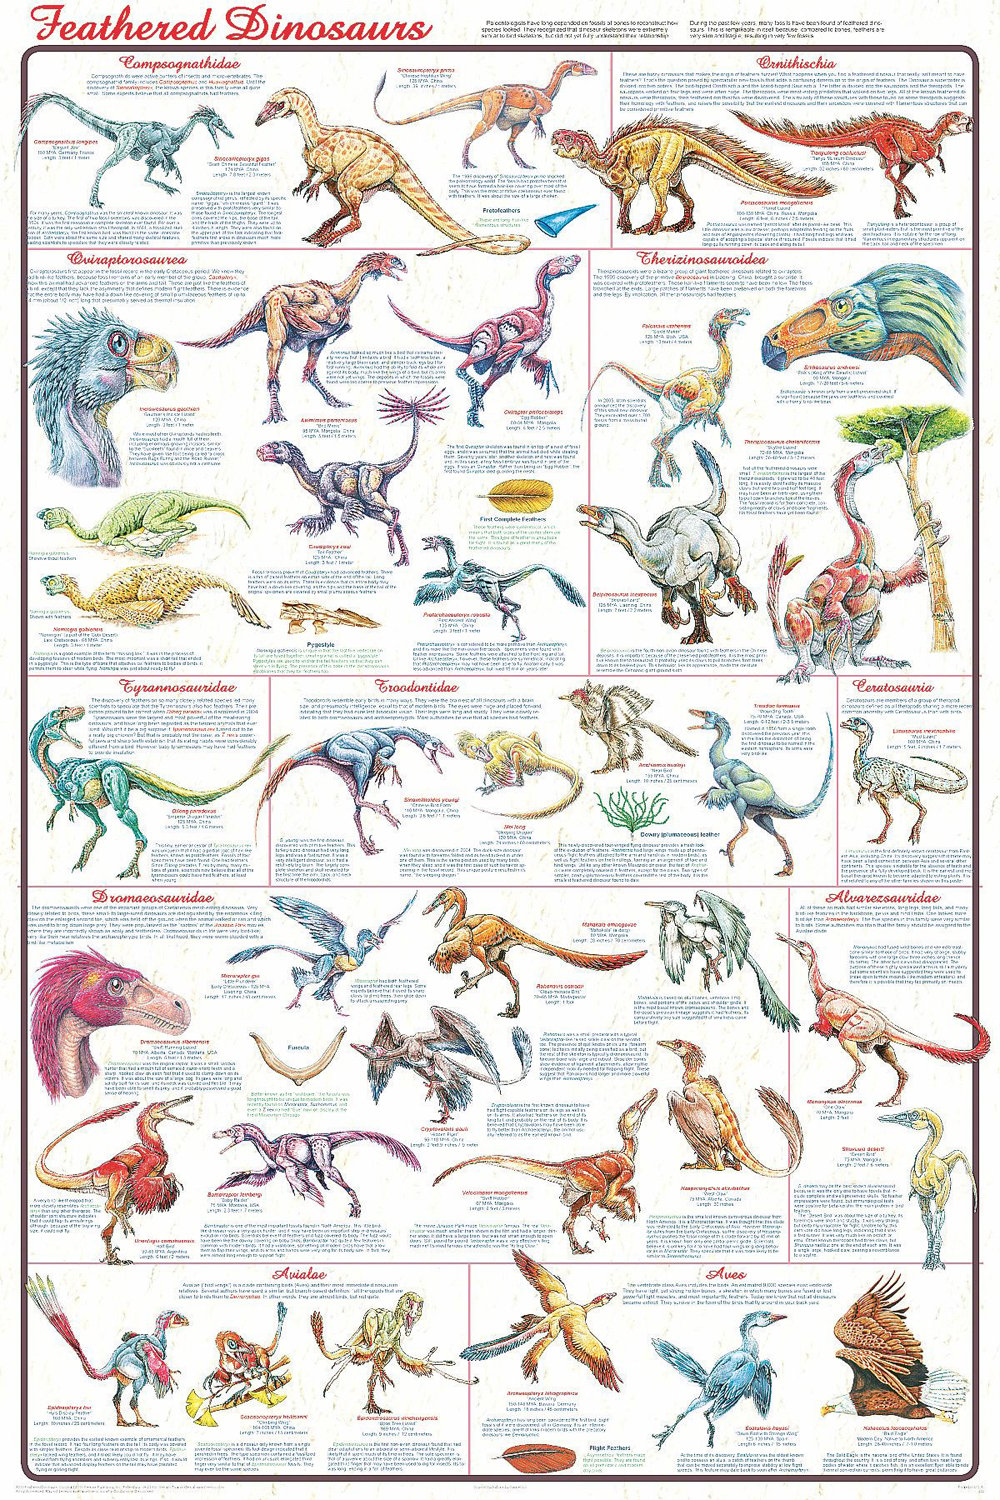 Feathered Dinosaurs Laminated Poster